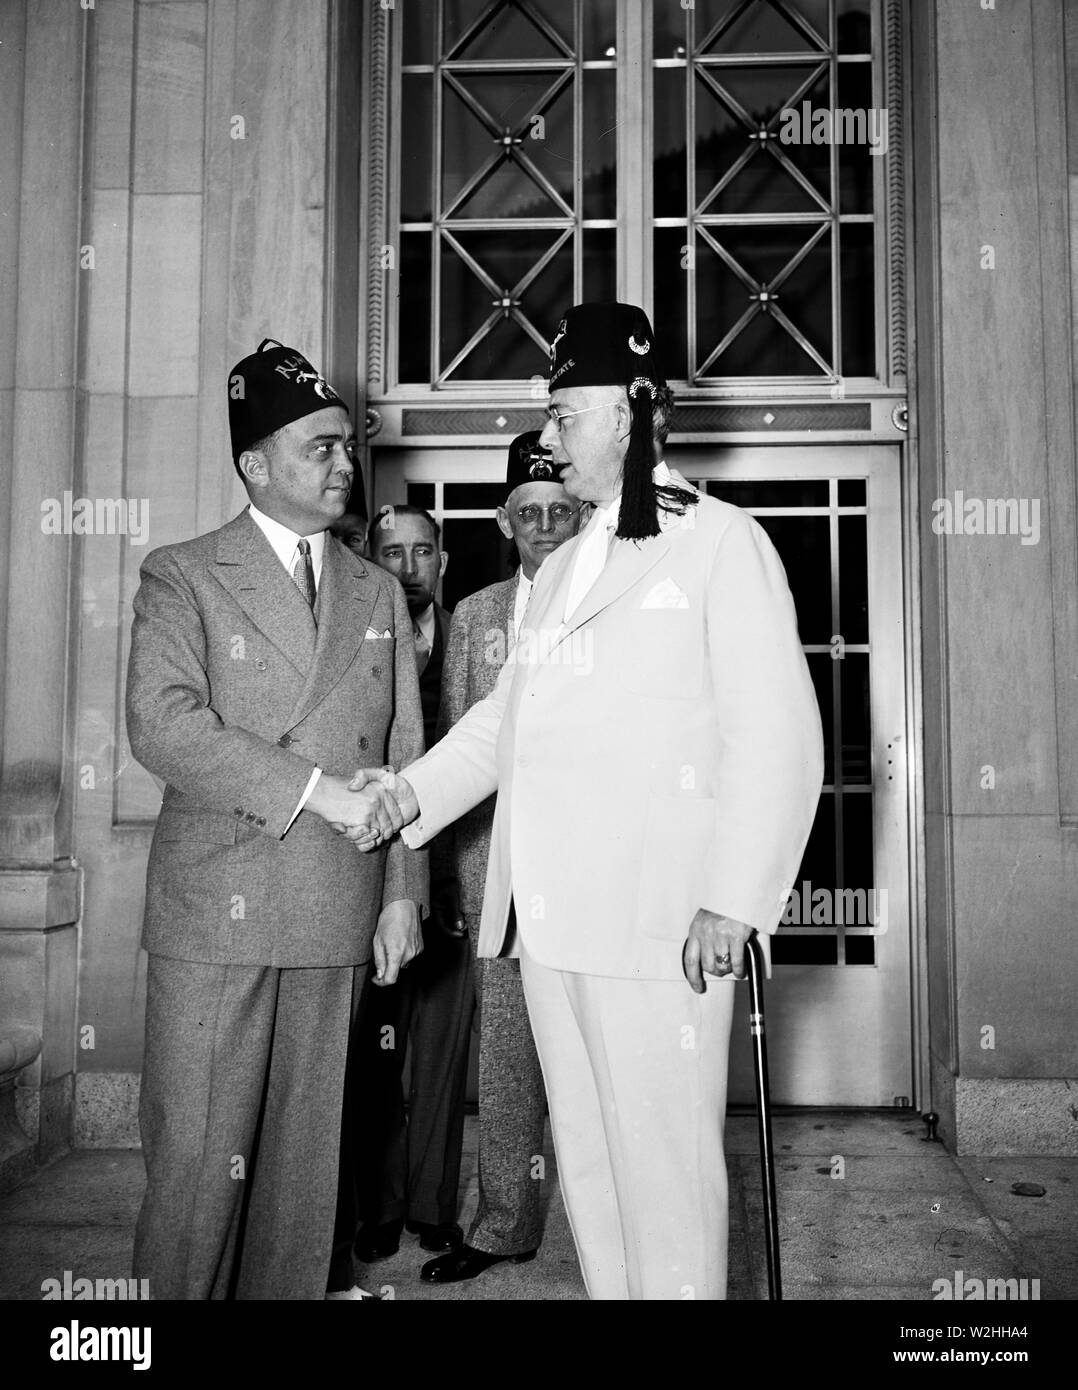 Shrine greeted by head 'G' man. J. Edgar Hoover, head of the Department of Justice's Bureau of Investigation ('G' Men to you) left, greets Imperial Potentate Dana S. Williams of Maine as the Shriners begin their national convention. 6/10/35 Stock Photo